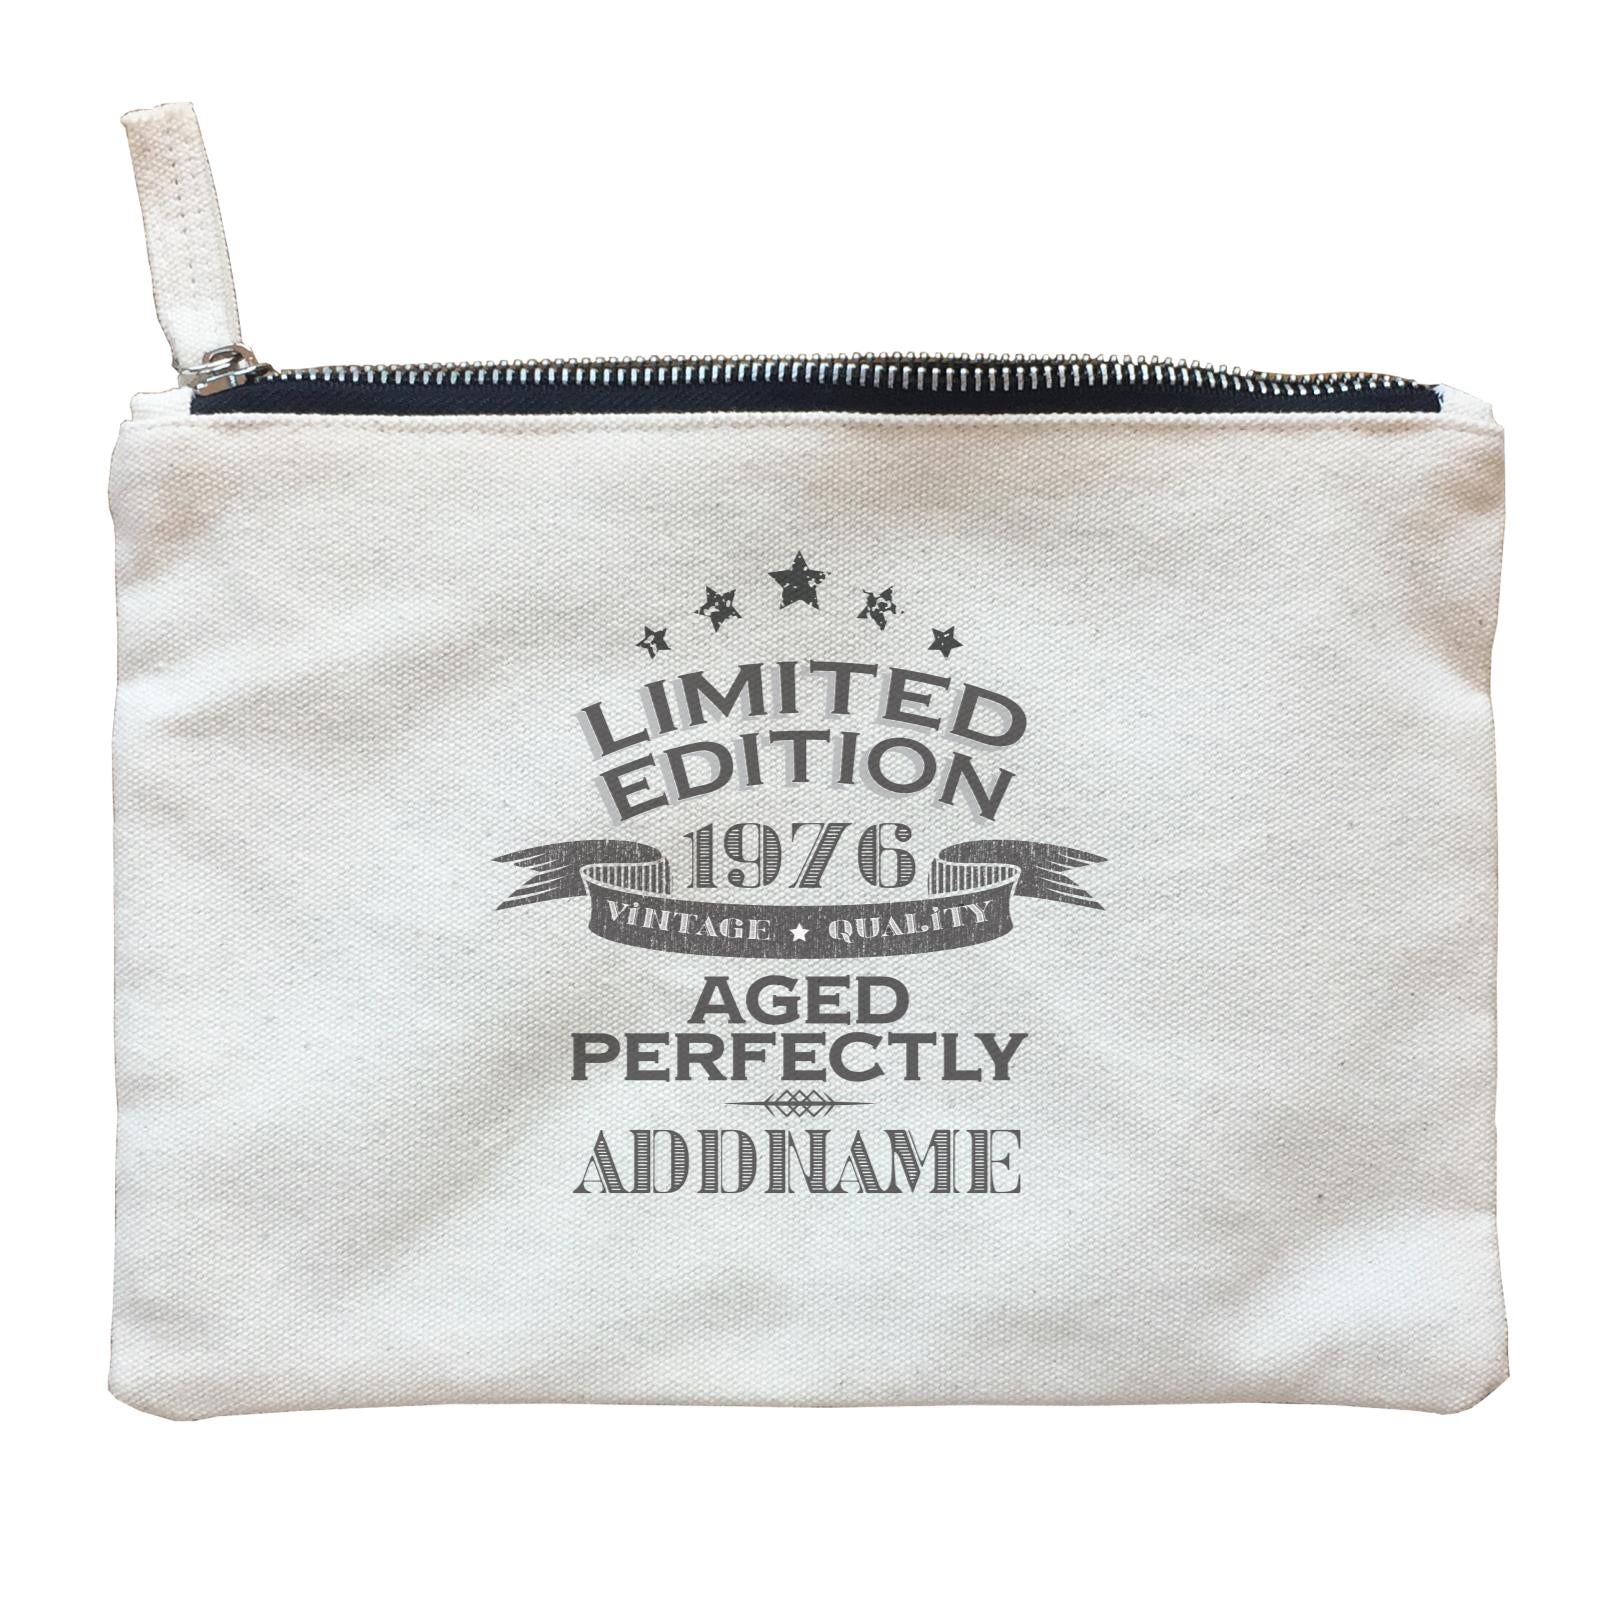 Personalize It Birthyear Limited Edition Aged Perfectly with Addname and Add Year Zipper Pouch